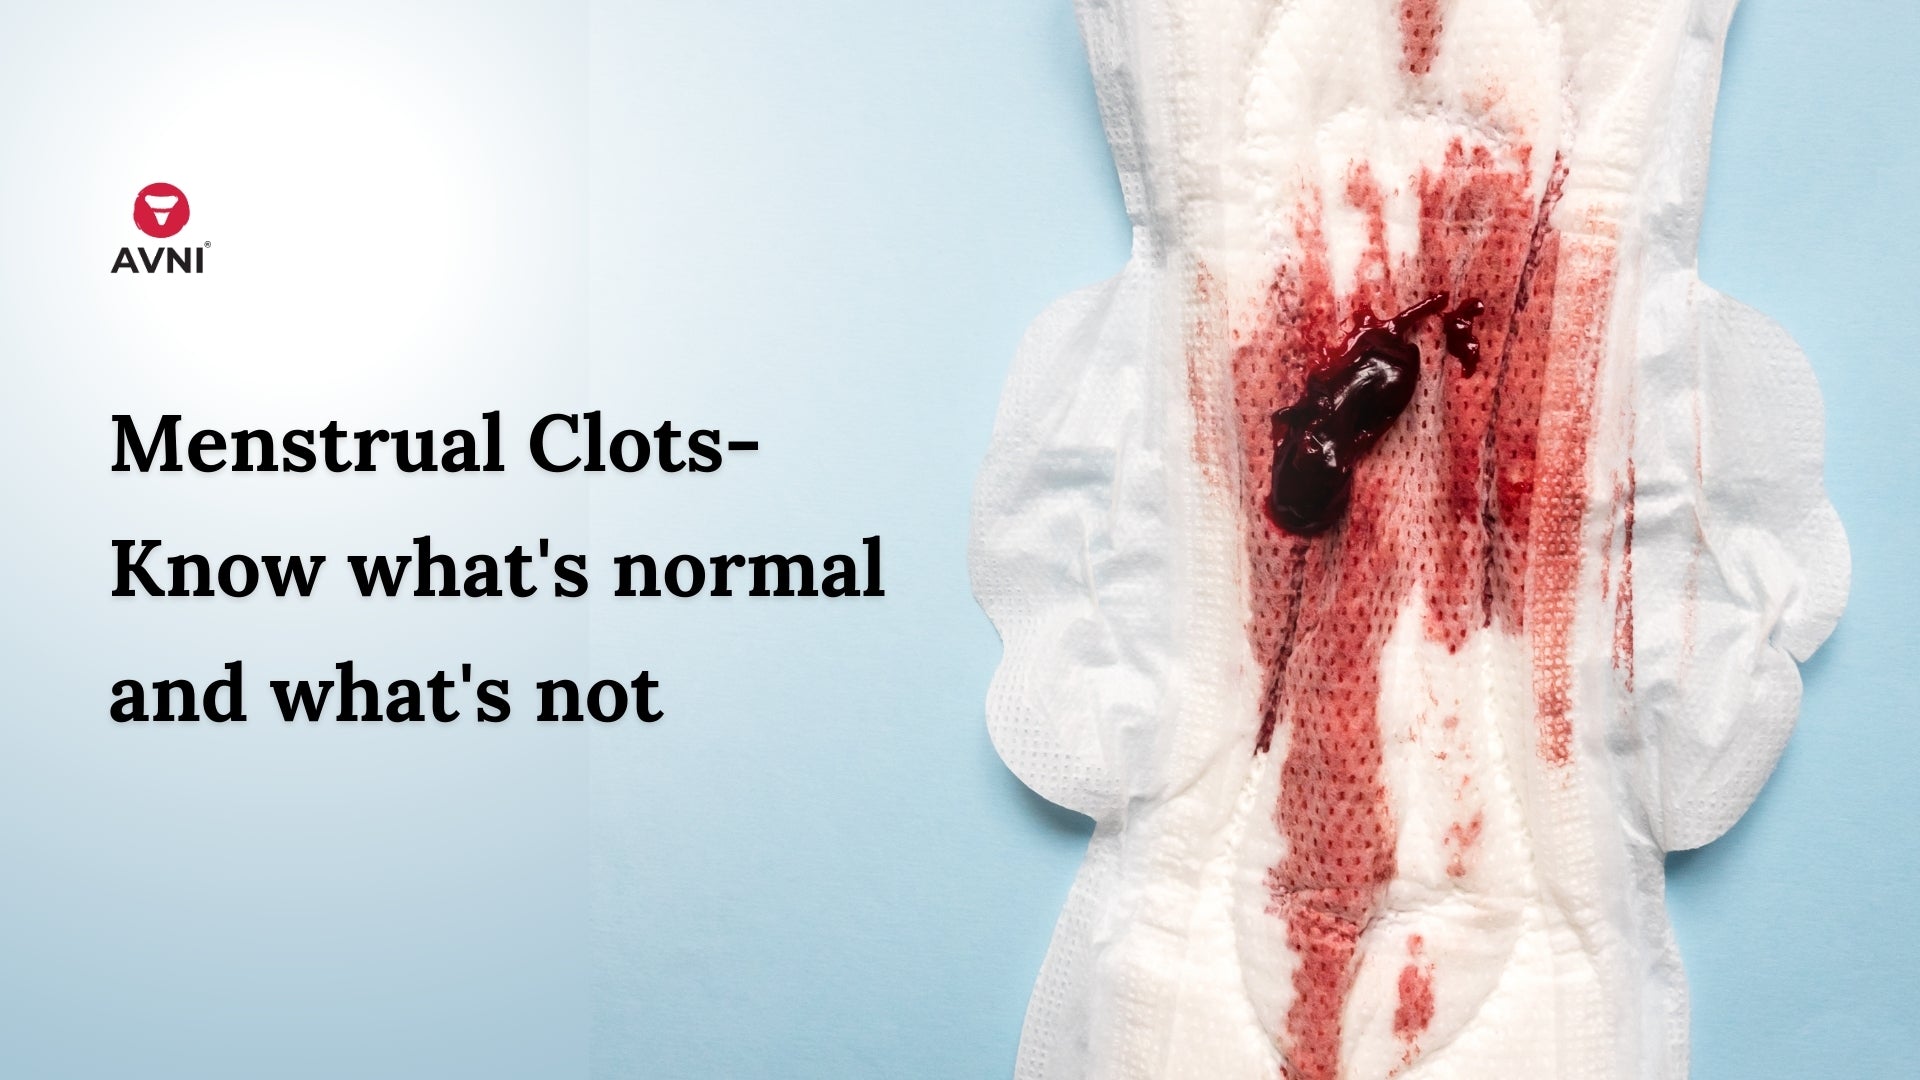 Perimenopausal bleeding and spotting: What's normal?